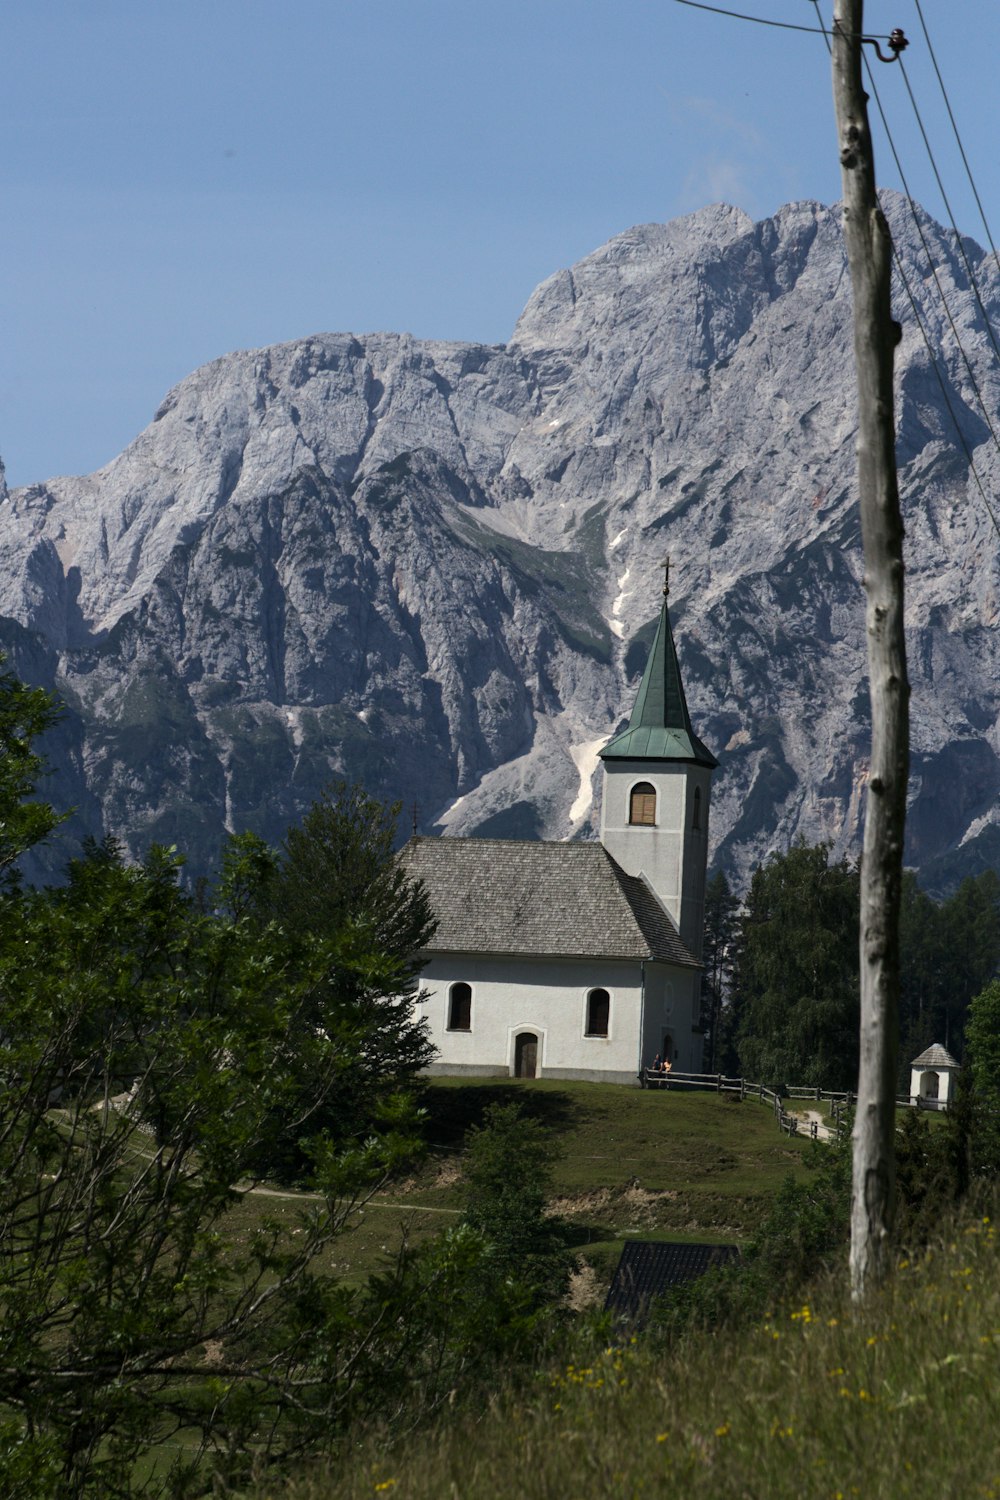 a white church with a steeple in front of a mountain range